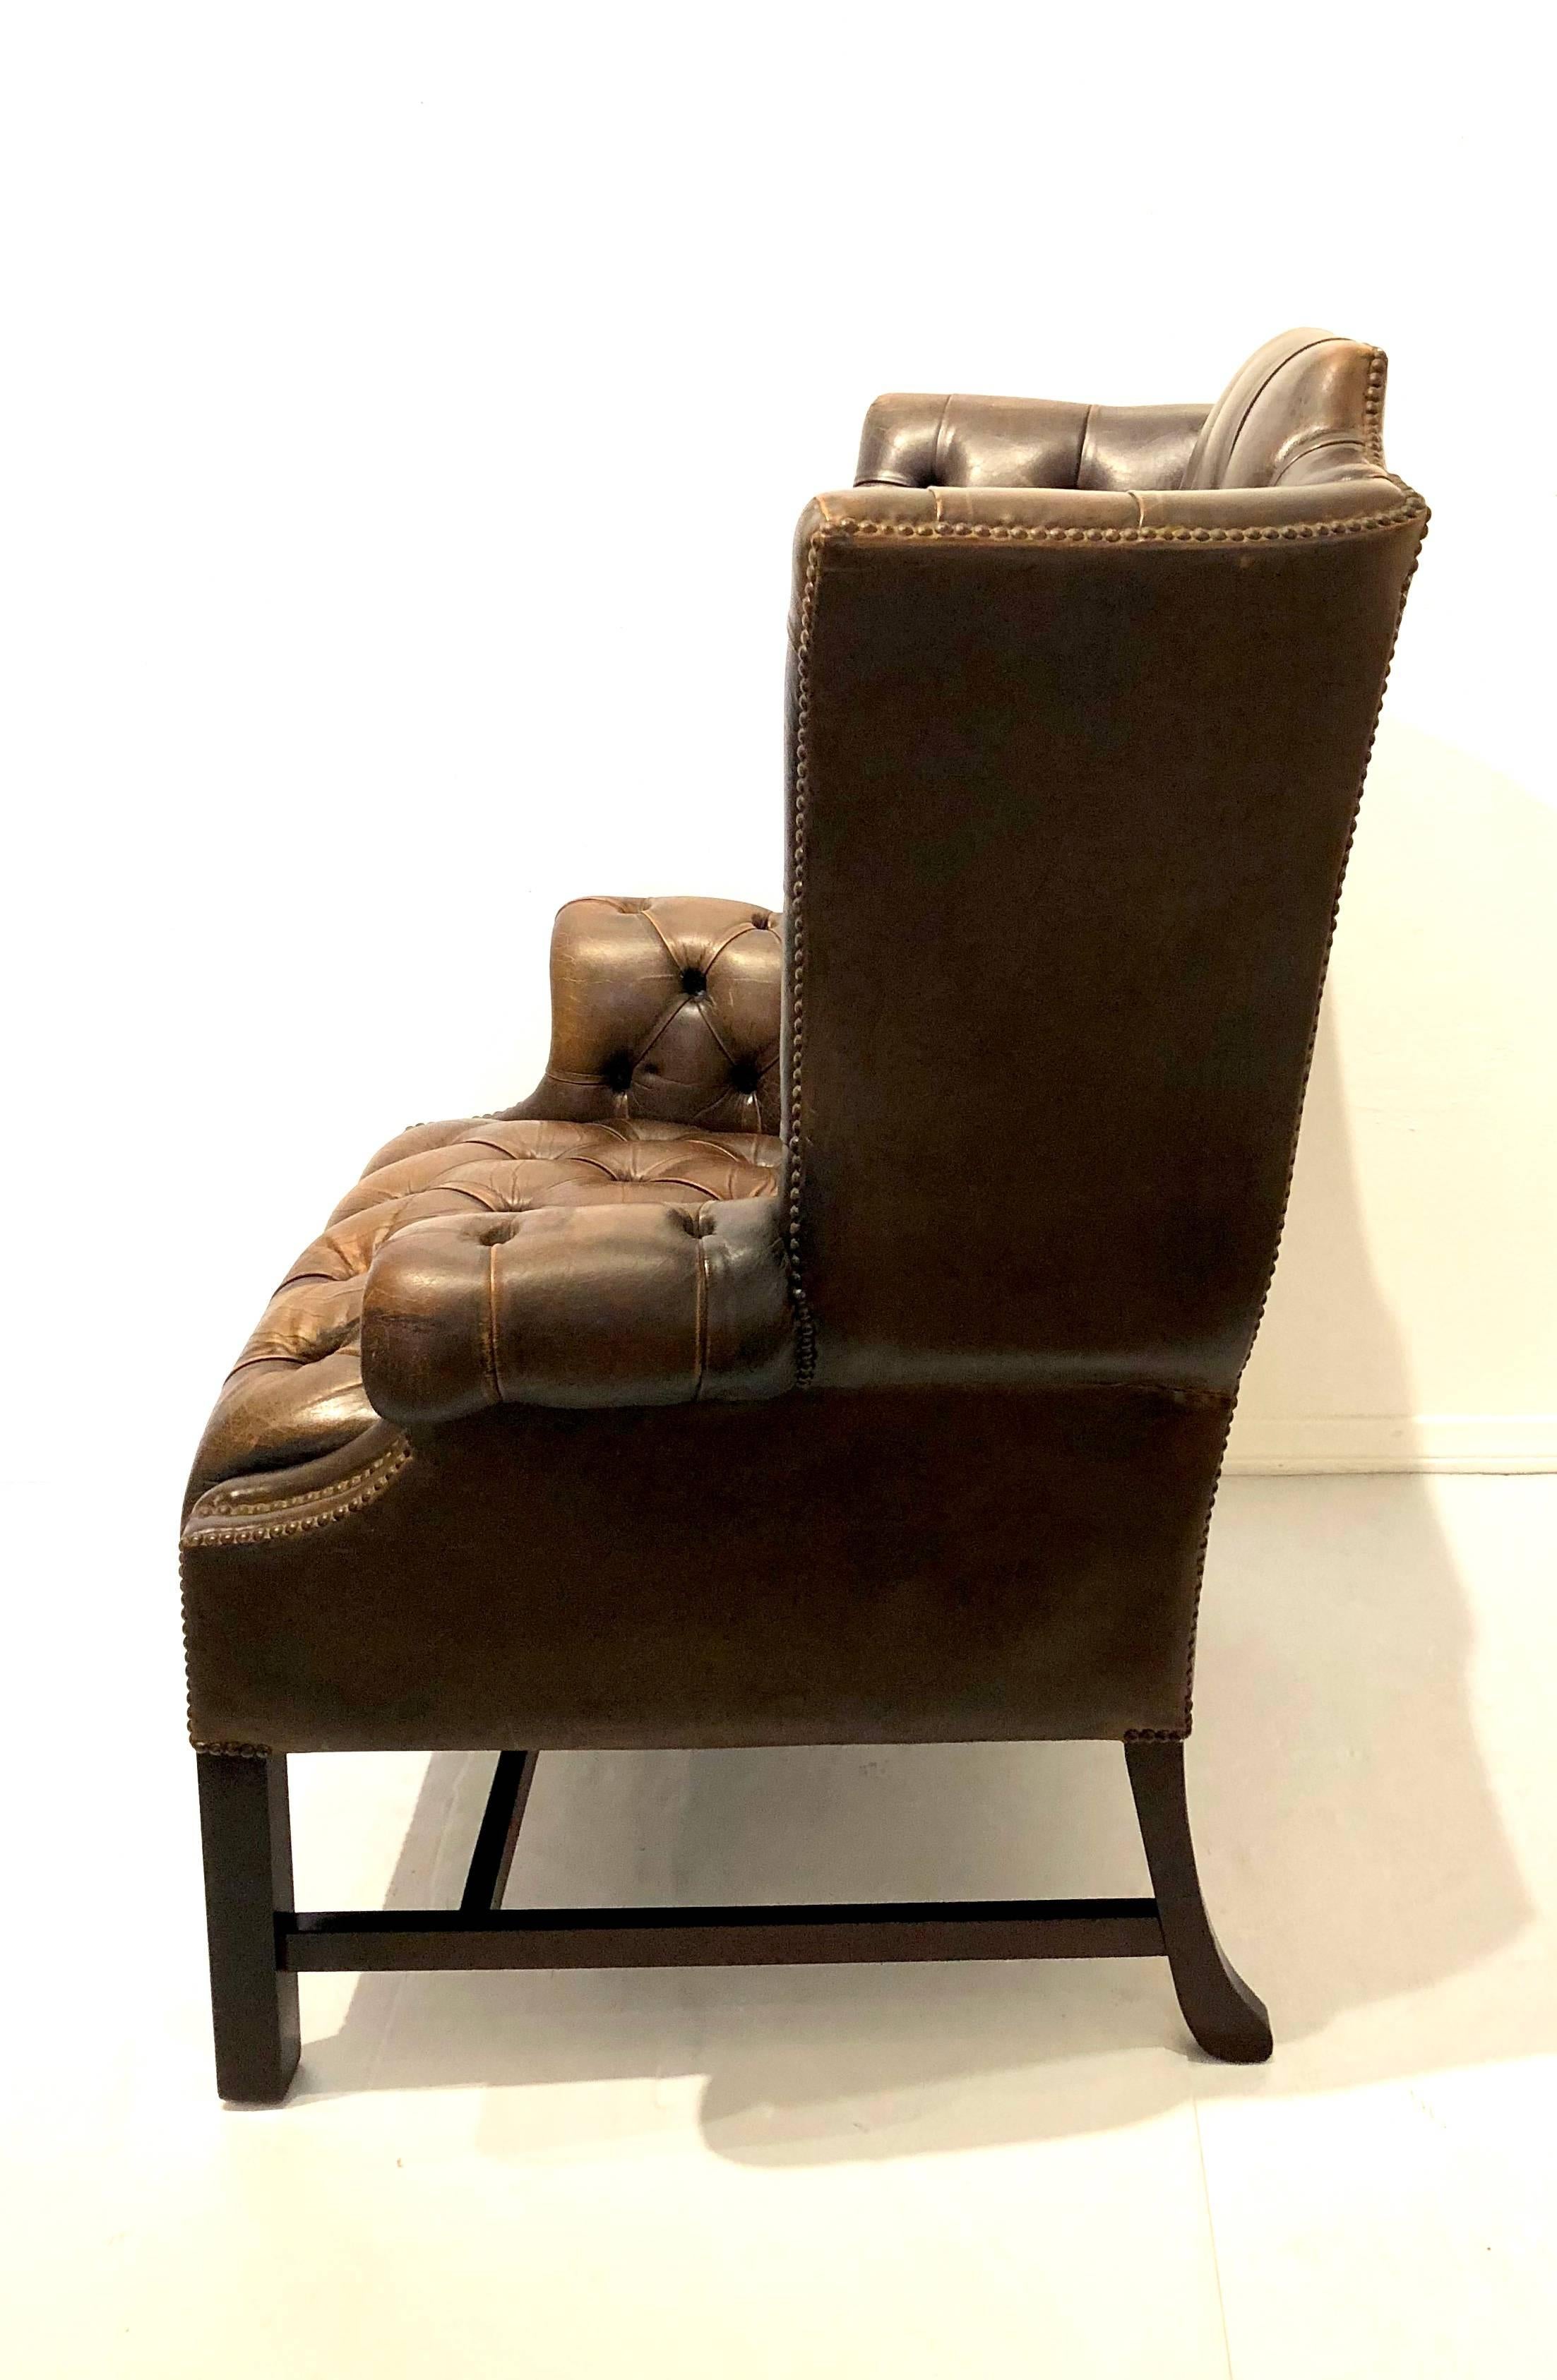 A classic antique English Chesterfield wing-back chair upholstered in brown distressed brown leather with tufted back and seat decorative nail heads around the silhouette. Chair base on square Marlboro front legs and splayed back legs that are